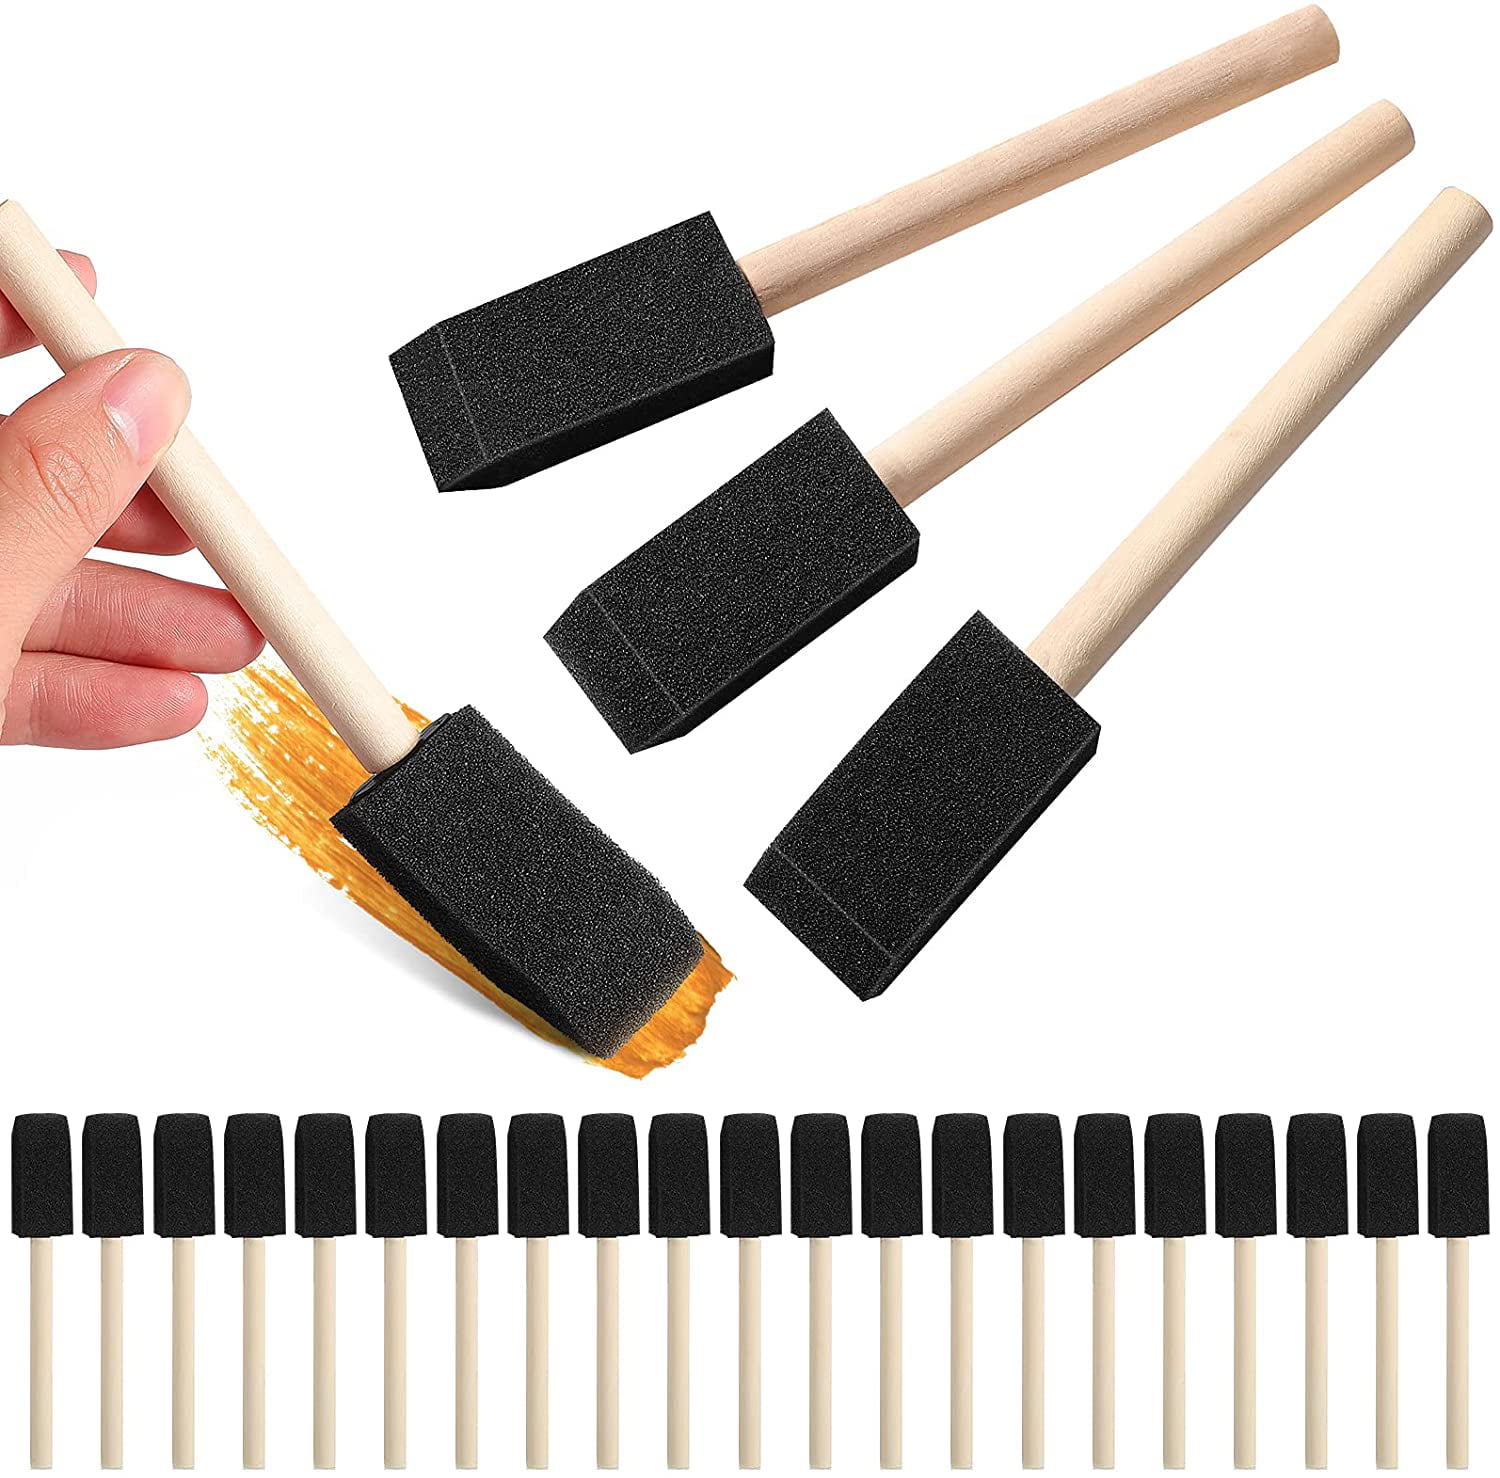 20 Pieces Foam Paint Brush Foam Sponge Bevel Tipped Brush Set with Wooden Handle for Acrylics Stains 6 Sizes Varnishes Crafts 